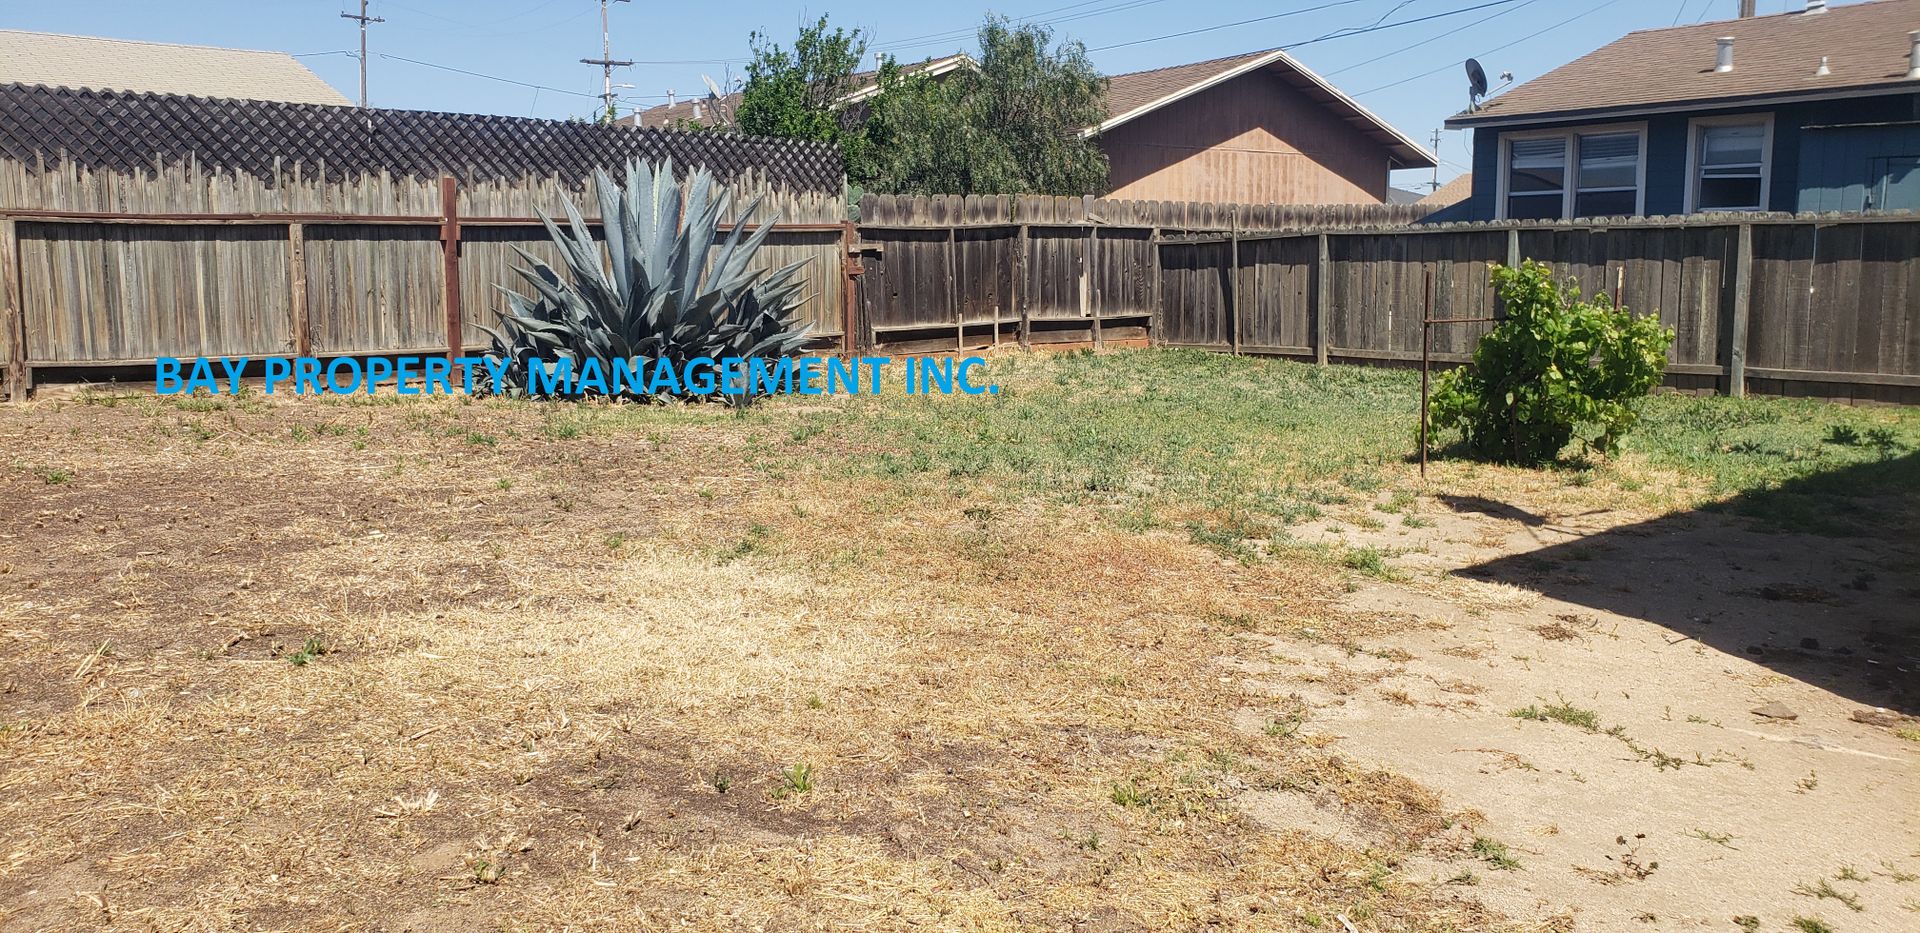 Updated 2 bedroom house on large lot in Soledad